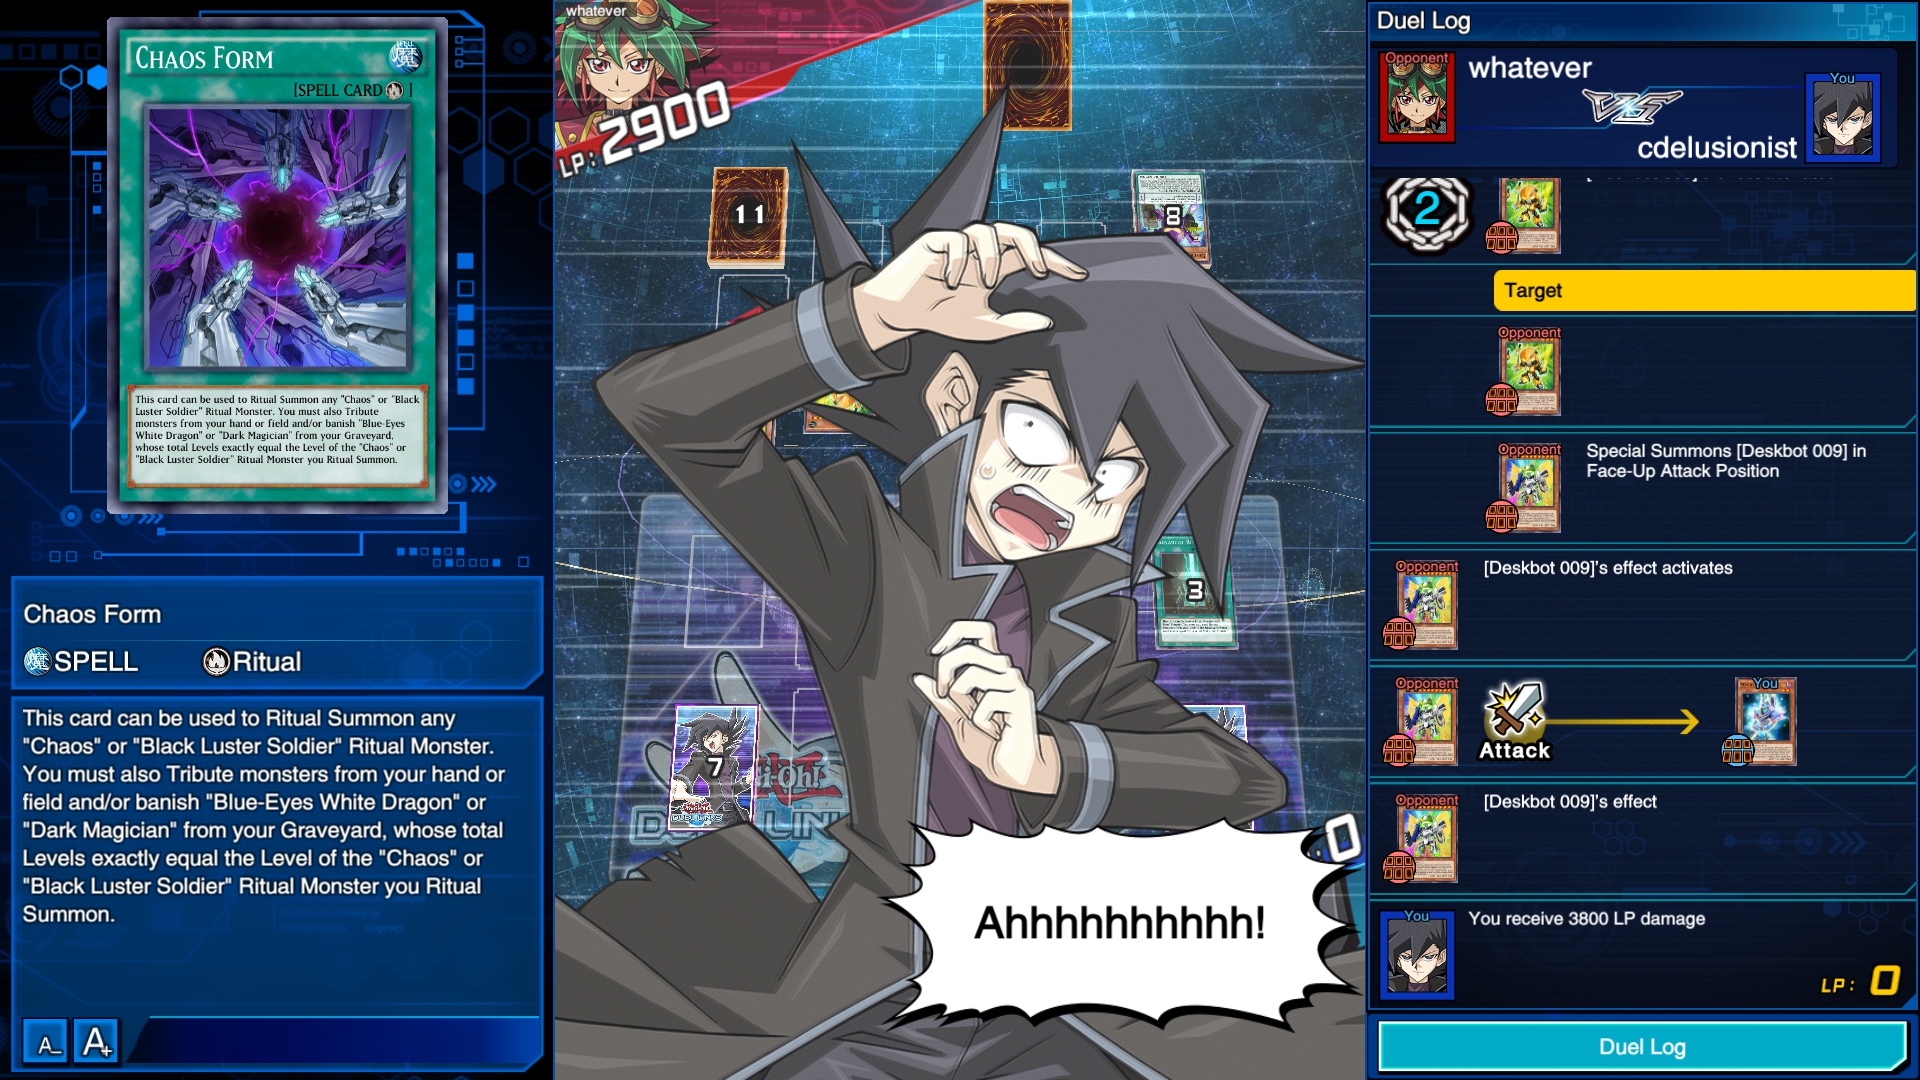 Master Duel: An Official Yu-Gi-Oh! Online Simulator